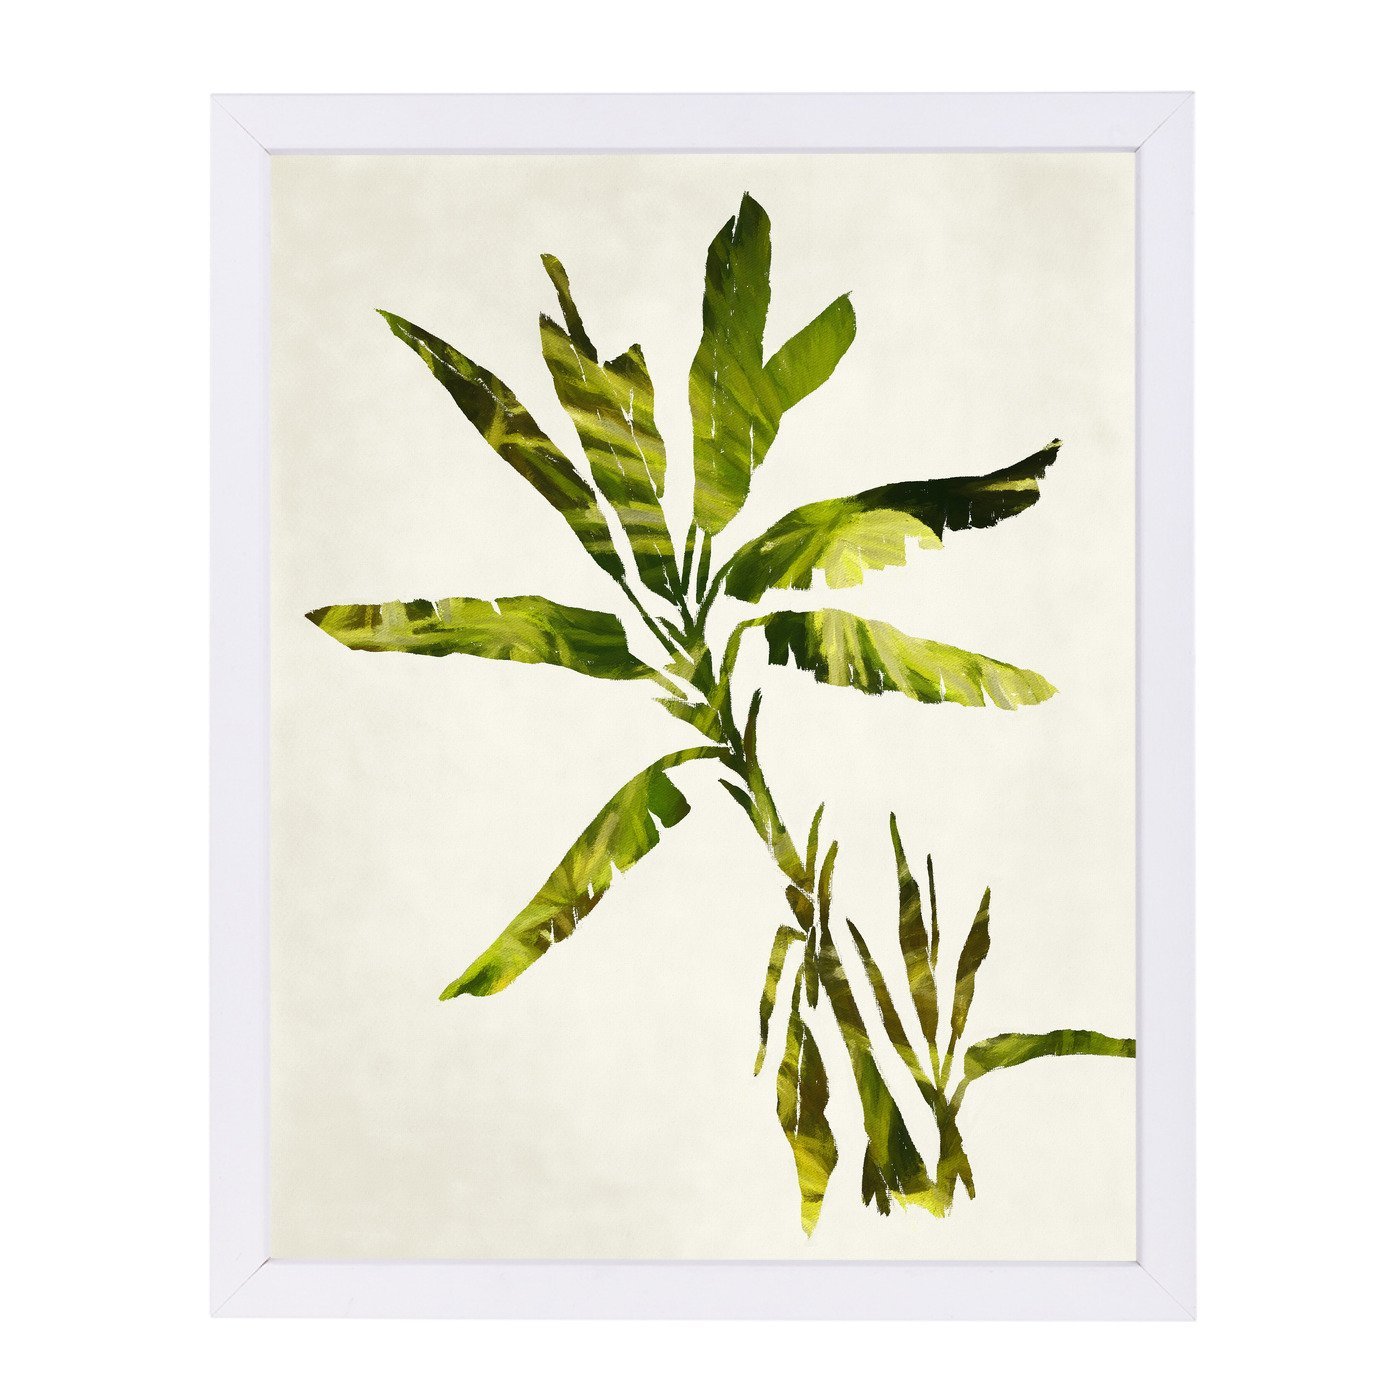 Banana Tree Collage By Chaos & Wonder Design - Framed Print - Americanflat